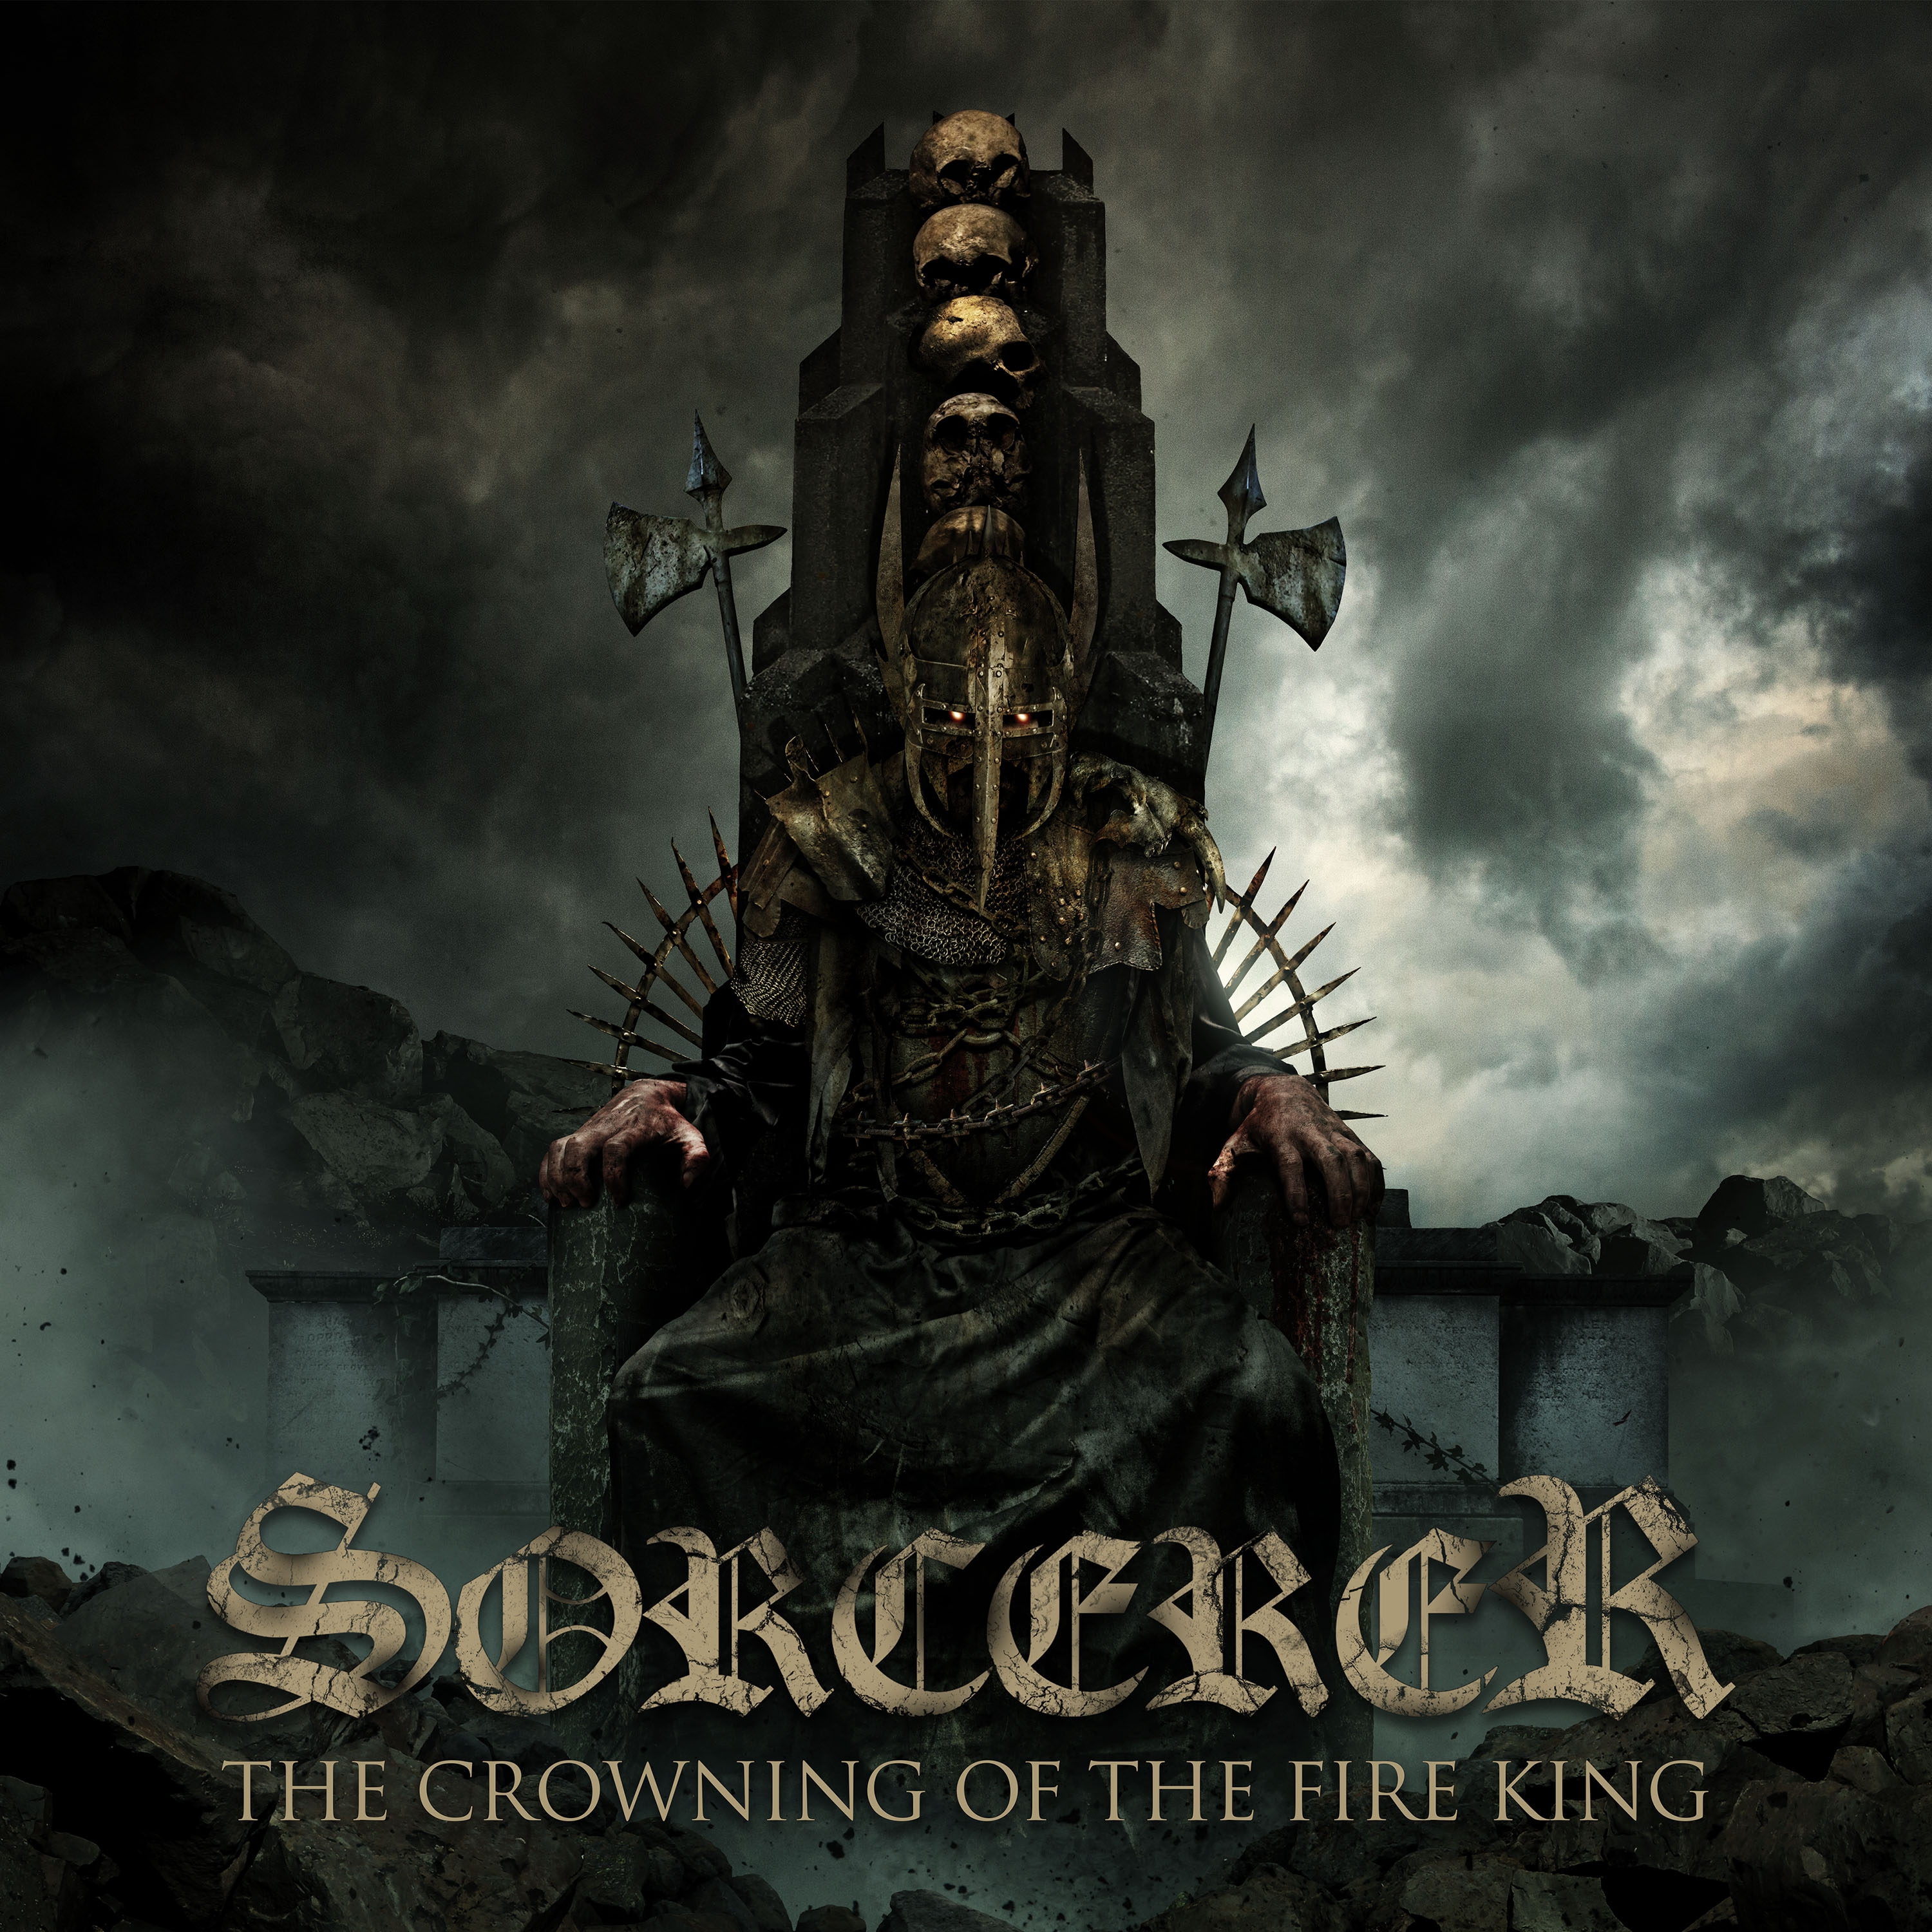 Sorcerer – The Crowning of the Fire King